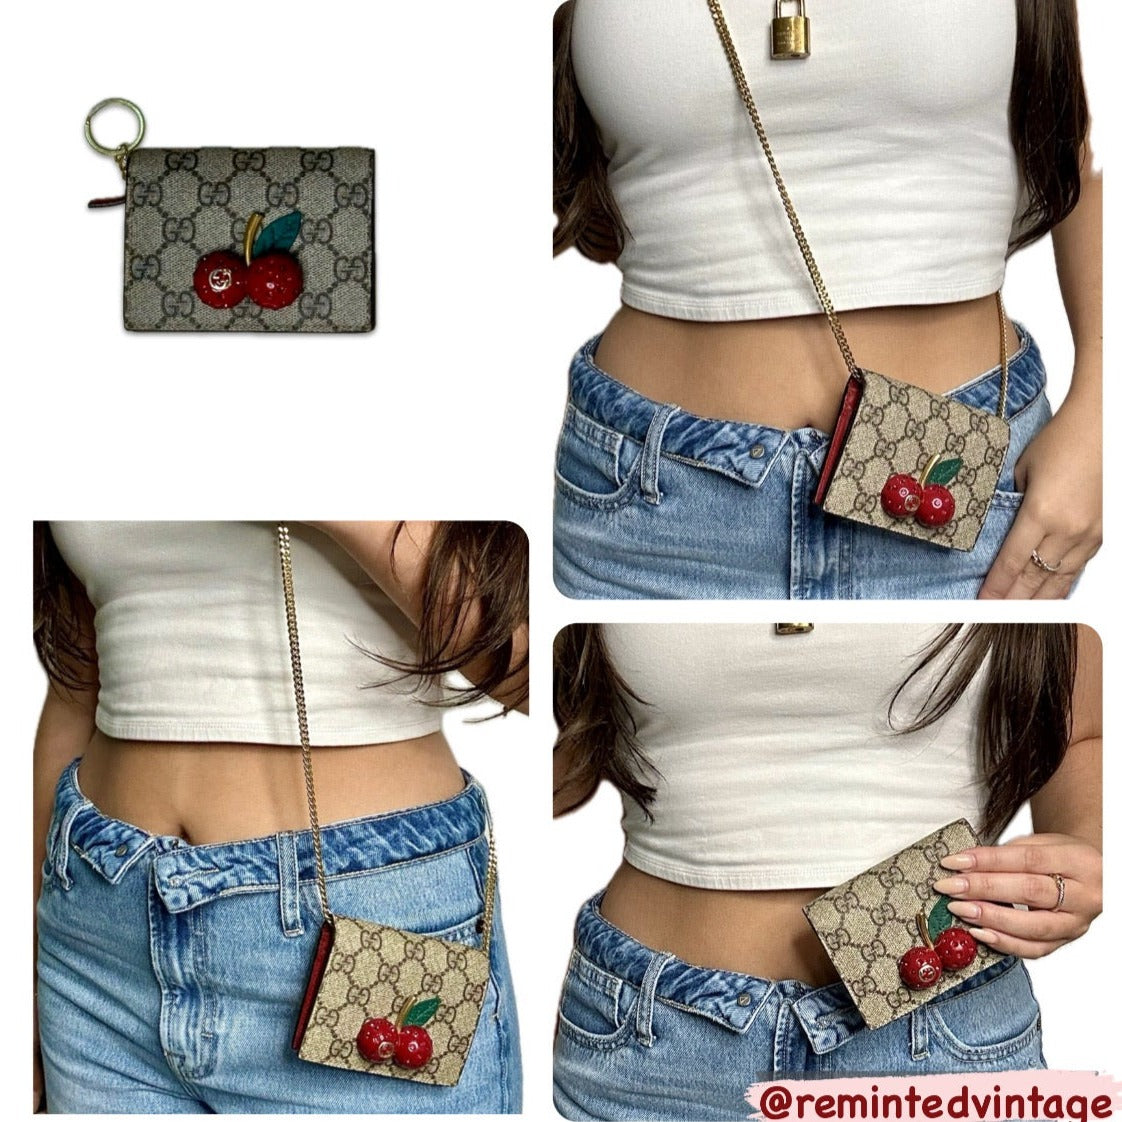 Cherries GG Supreme Gucci Compact Wallet